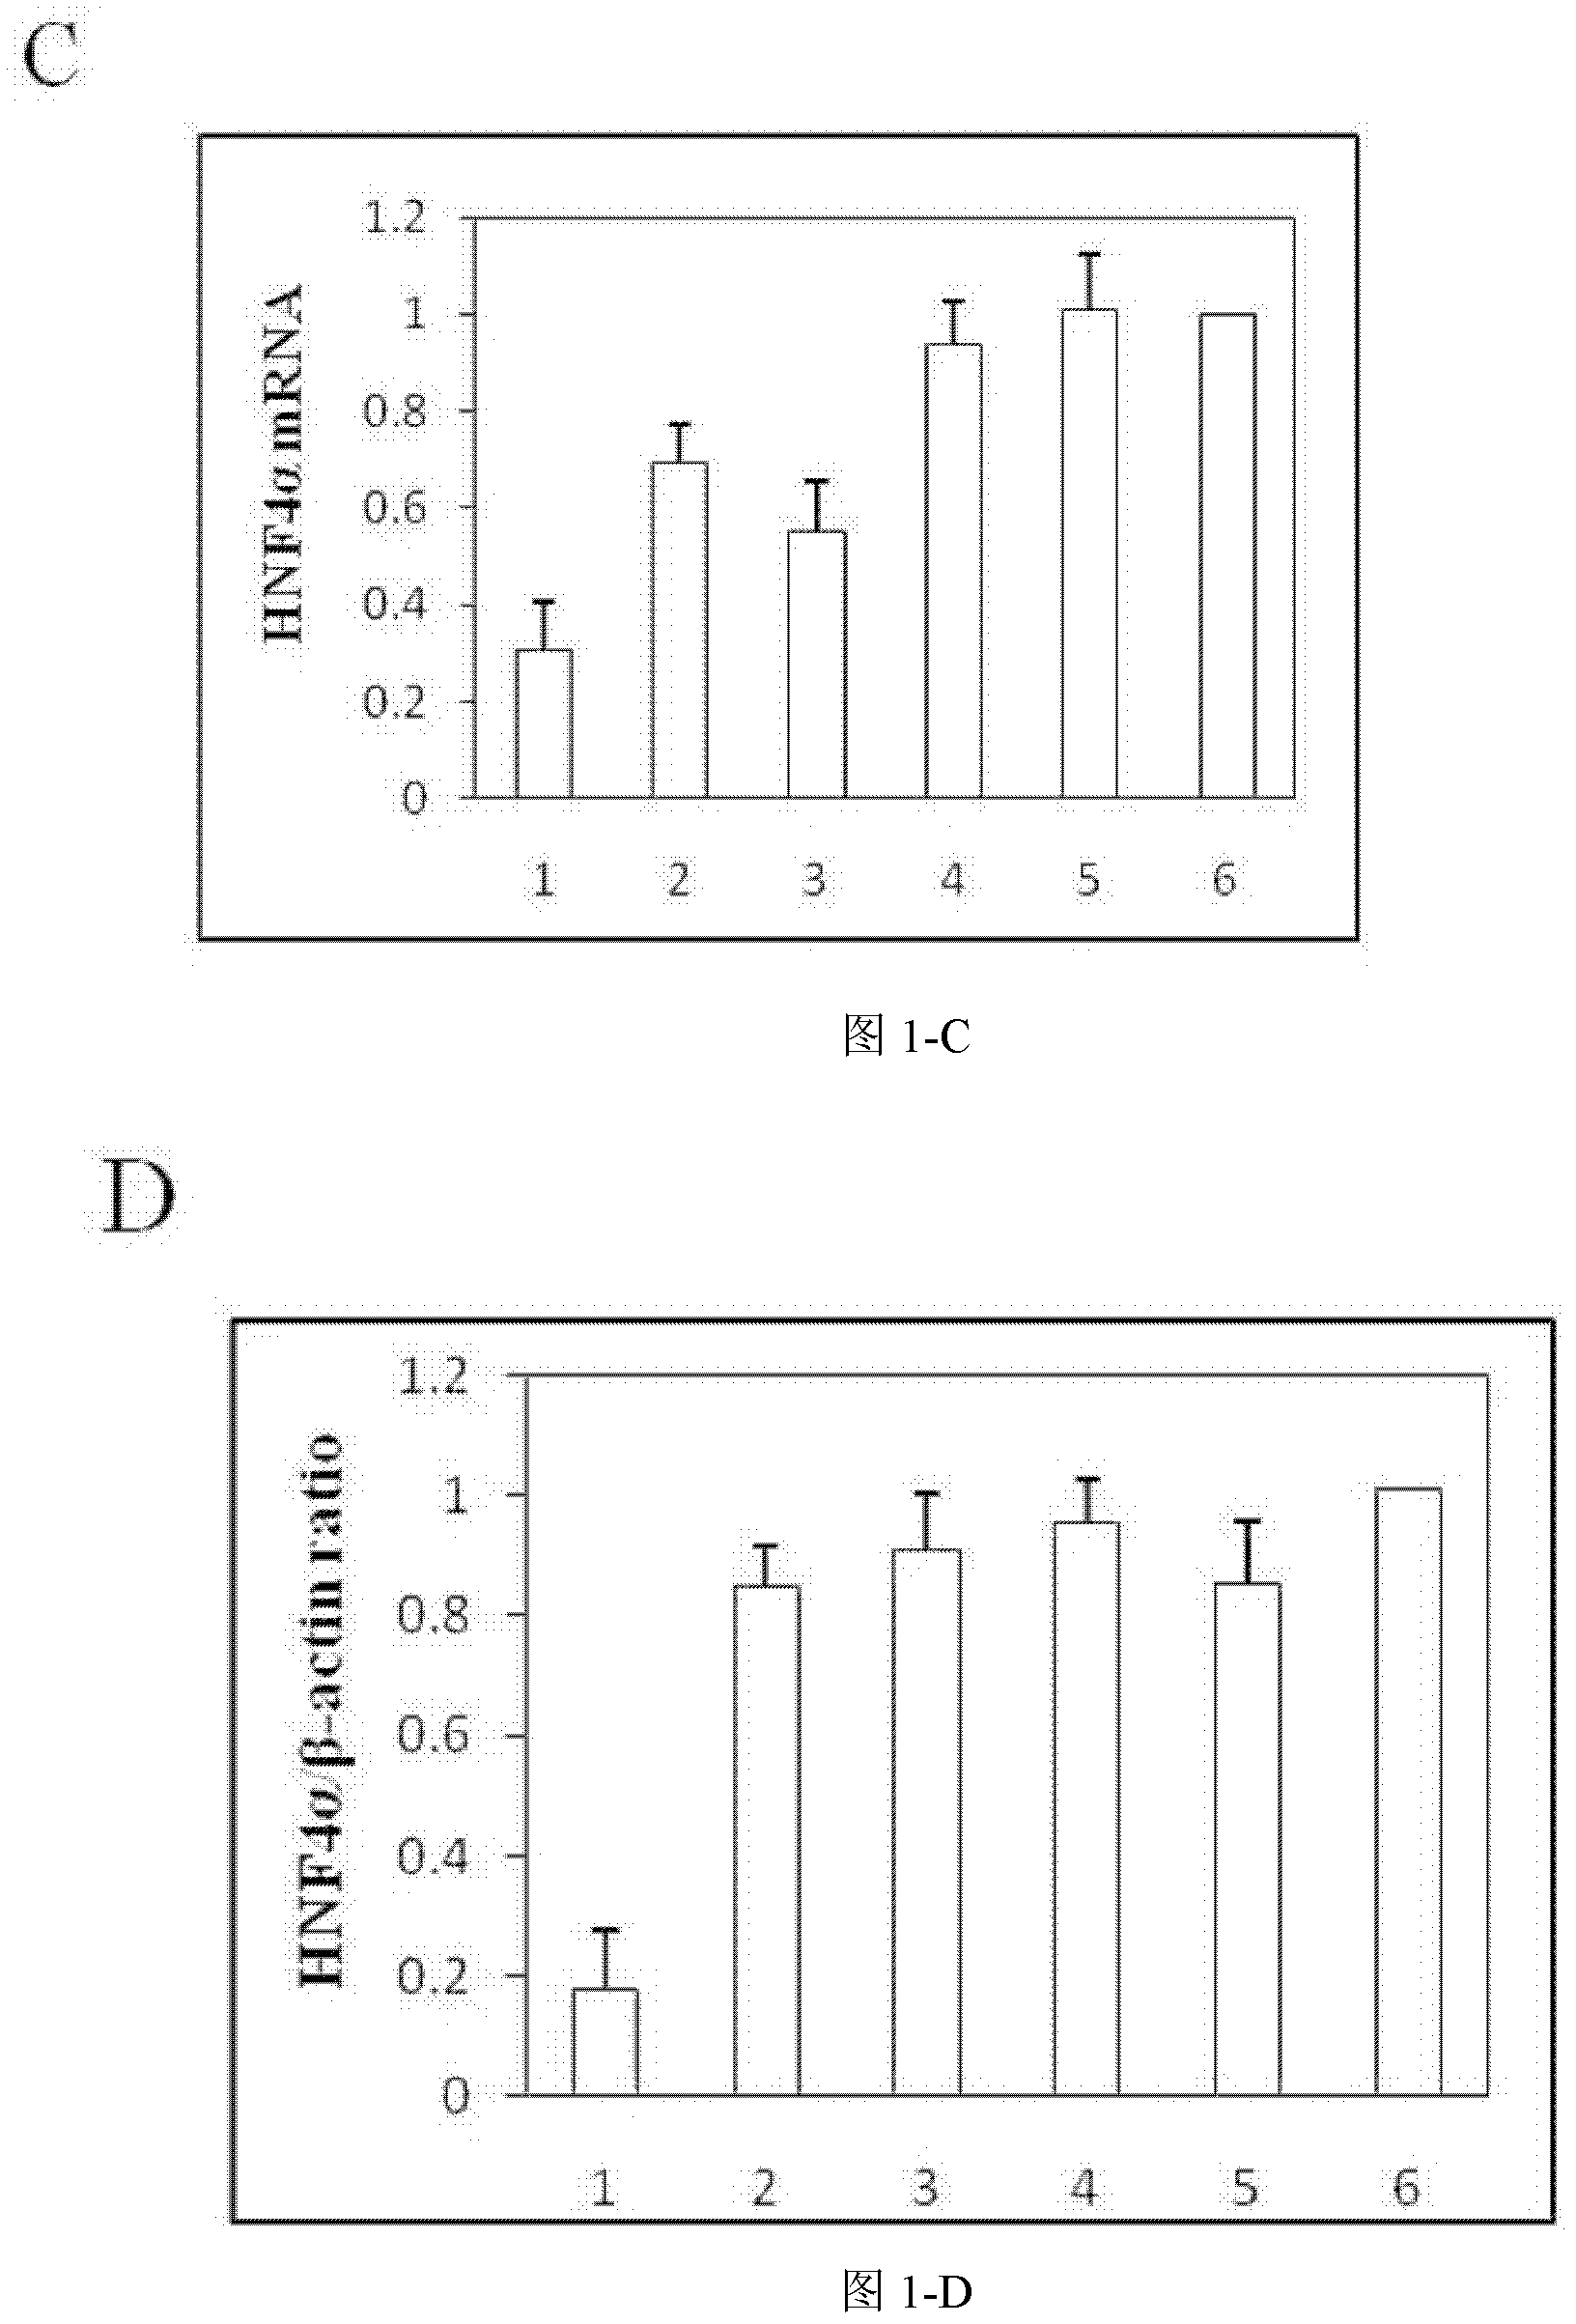 RNA interference sequence aiming at hepatocyte nuclear factor 4a and applications thereof